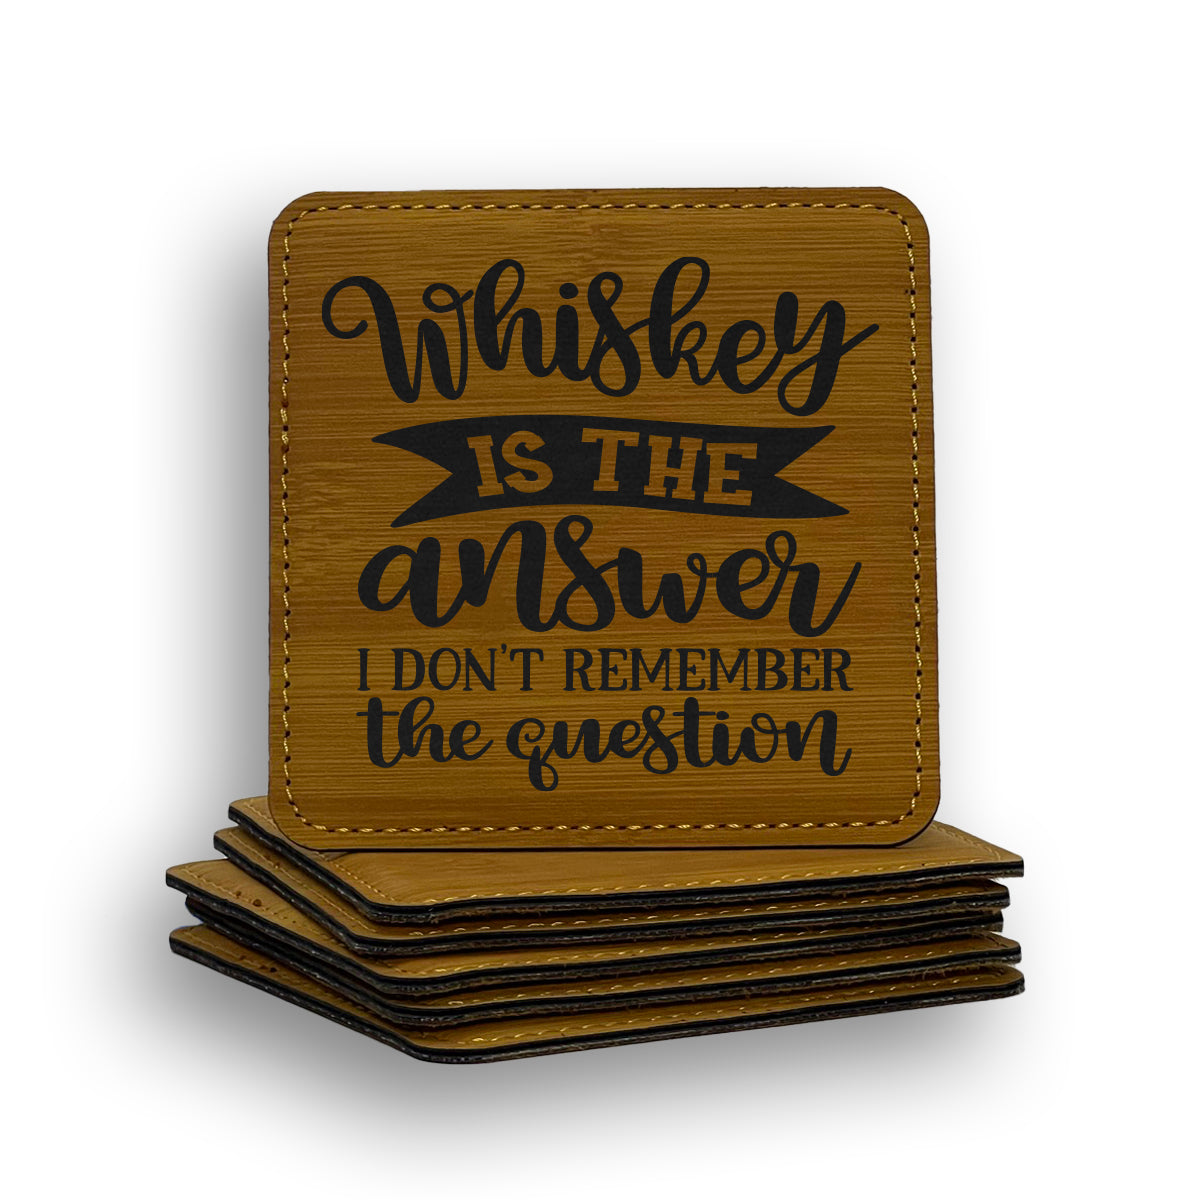 Whiskey answer question Coaster